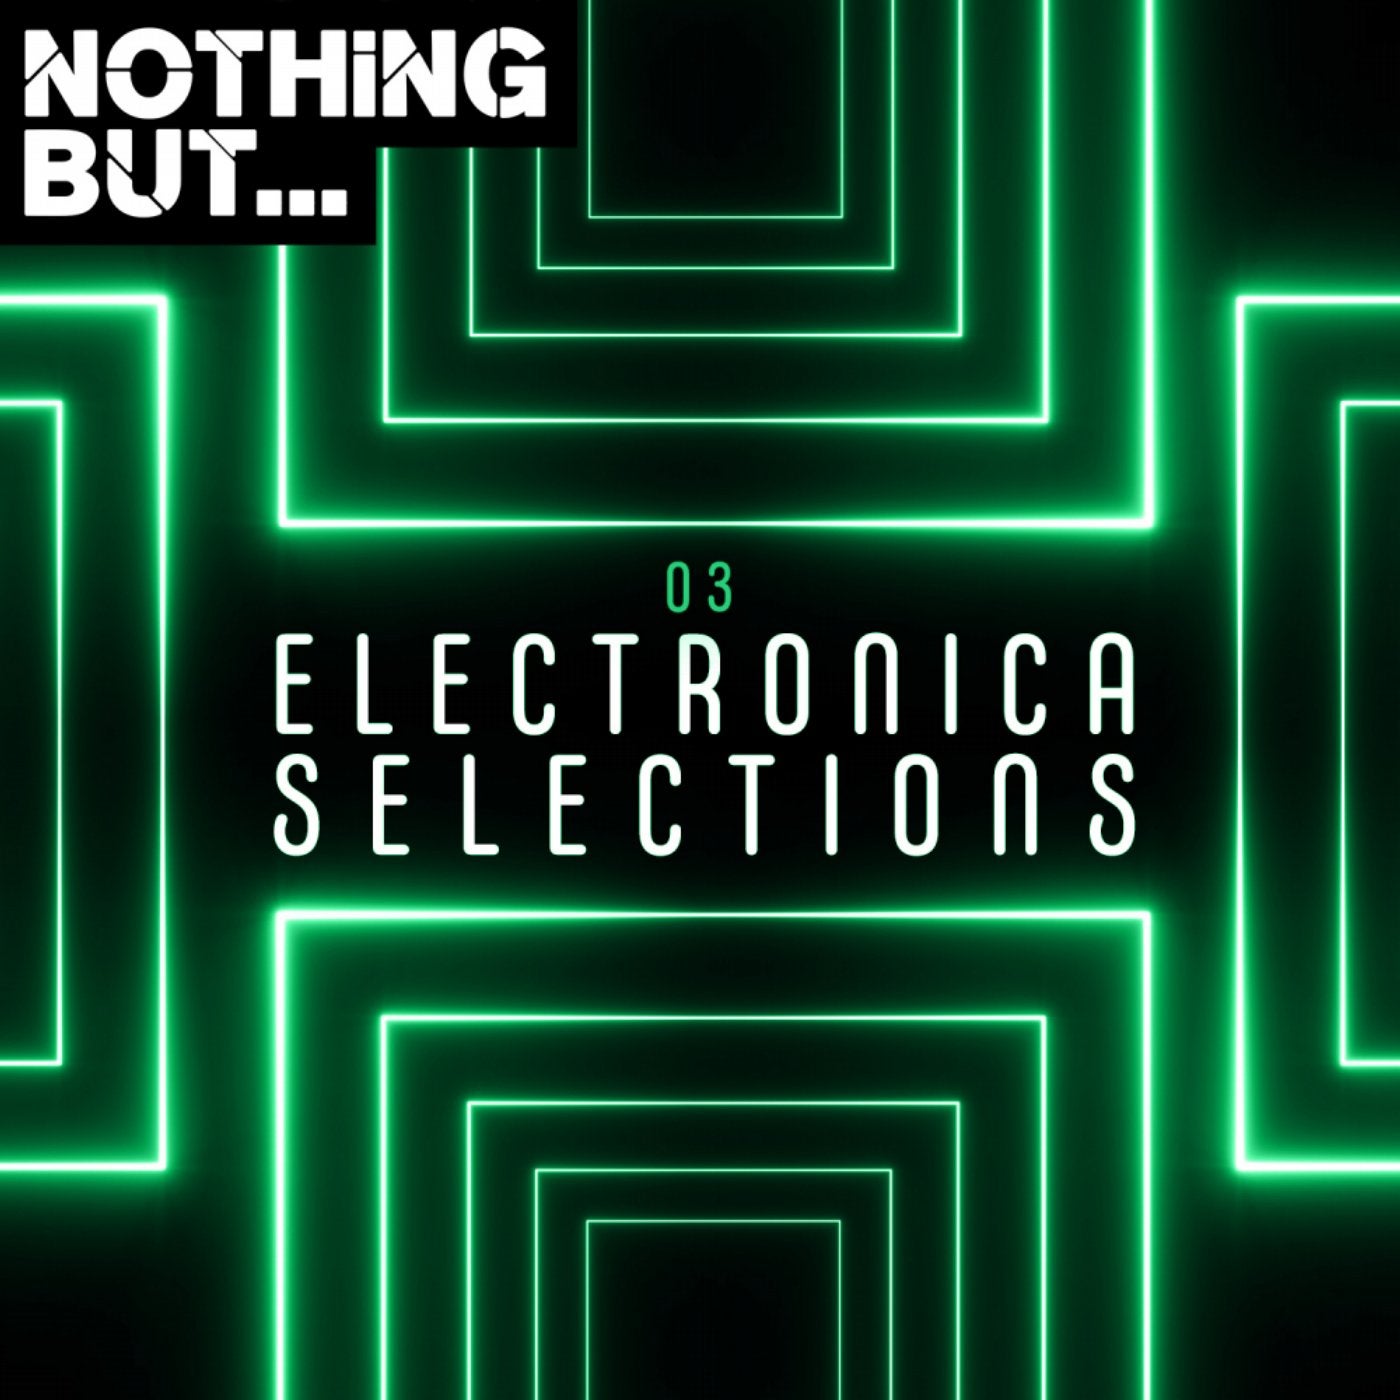 Nothing But... Electronica Selections, Vol. 03